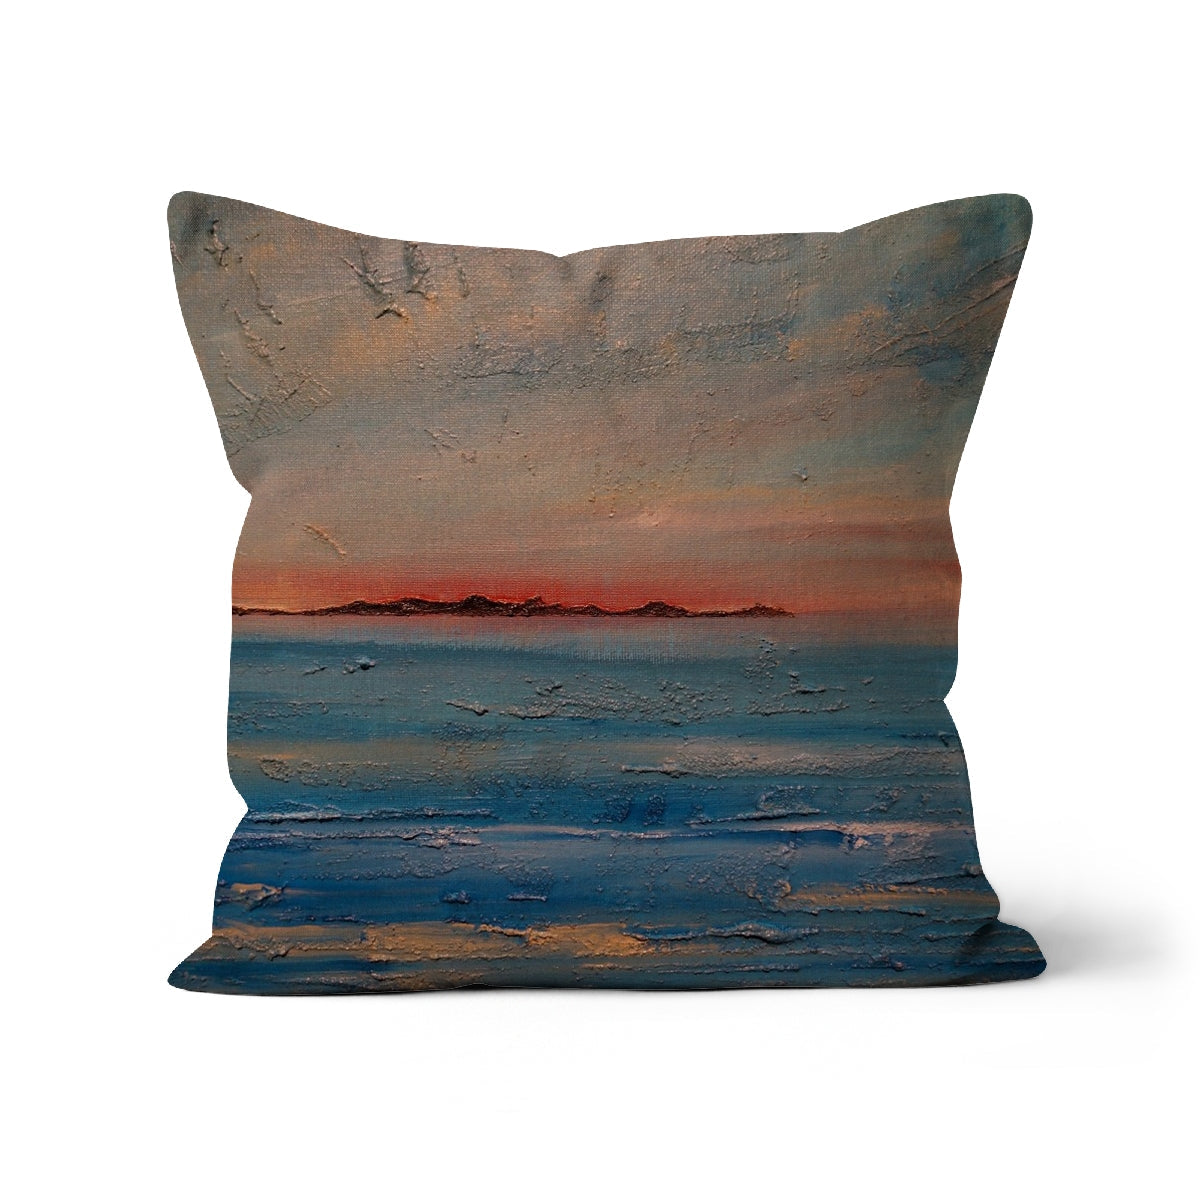 Gigha Sunset Art Gifts Cushion-Cushions-Hebridean Islands Art Gallery-Canvas-12"x12"-Paintings, Prints, Homeware, Art Gifts From Scotland By Scottish Artist Kevin Hunter